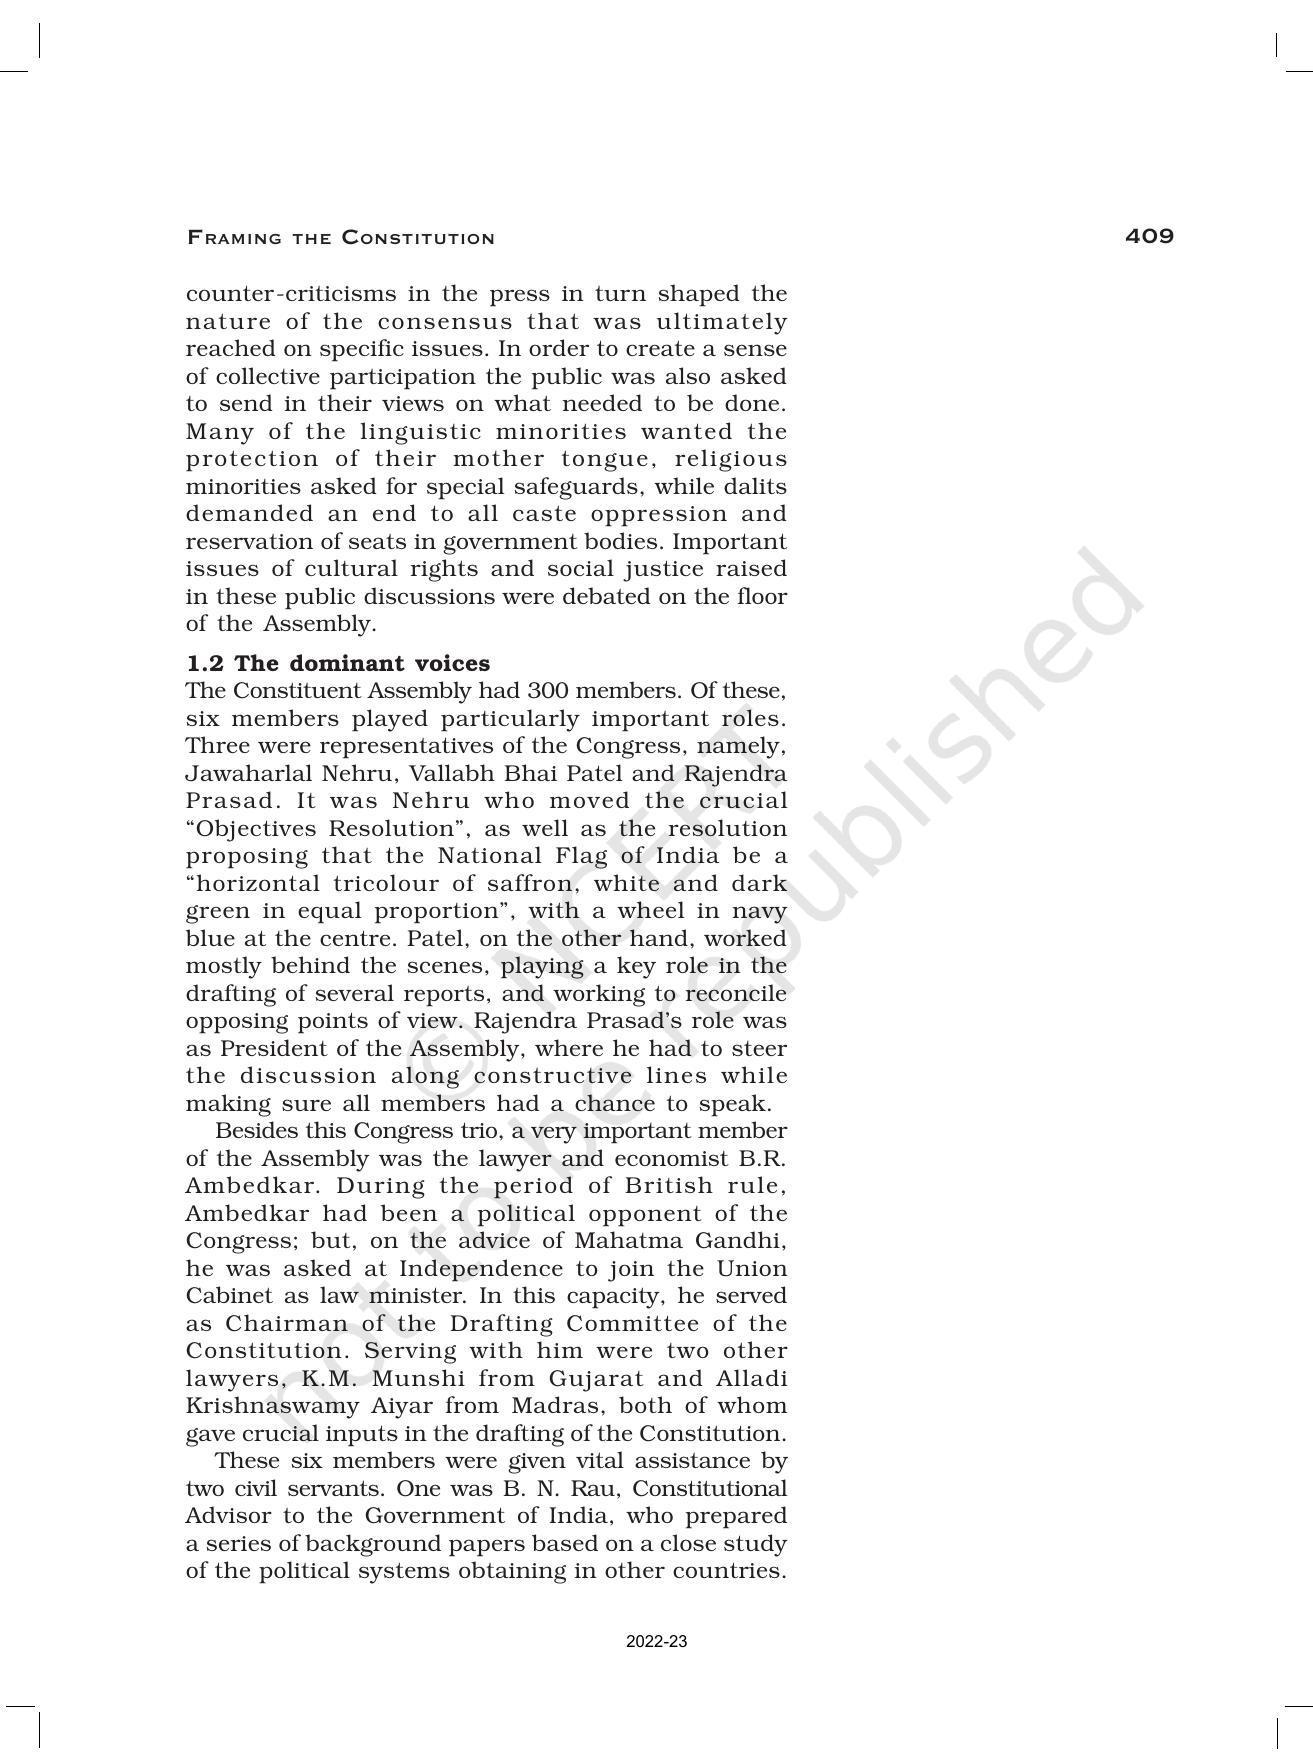 NCERT Book for Class 12 History (Part-III) Chapter 15 Framing and the Constitution - Page 5